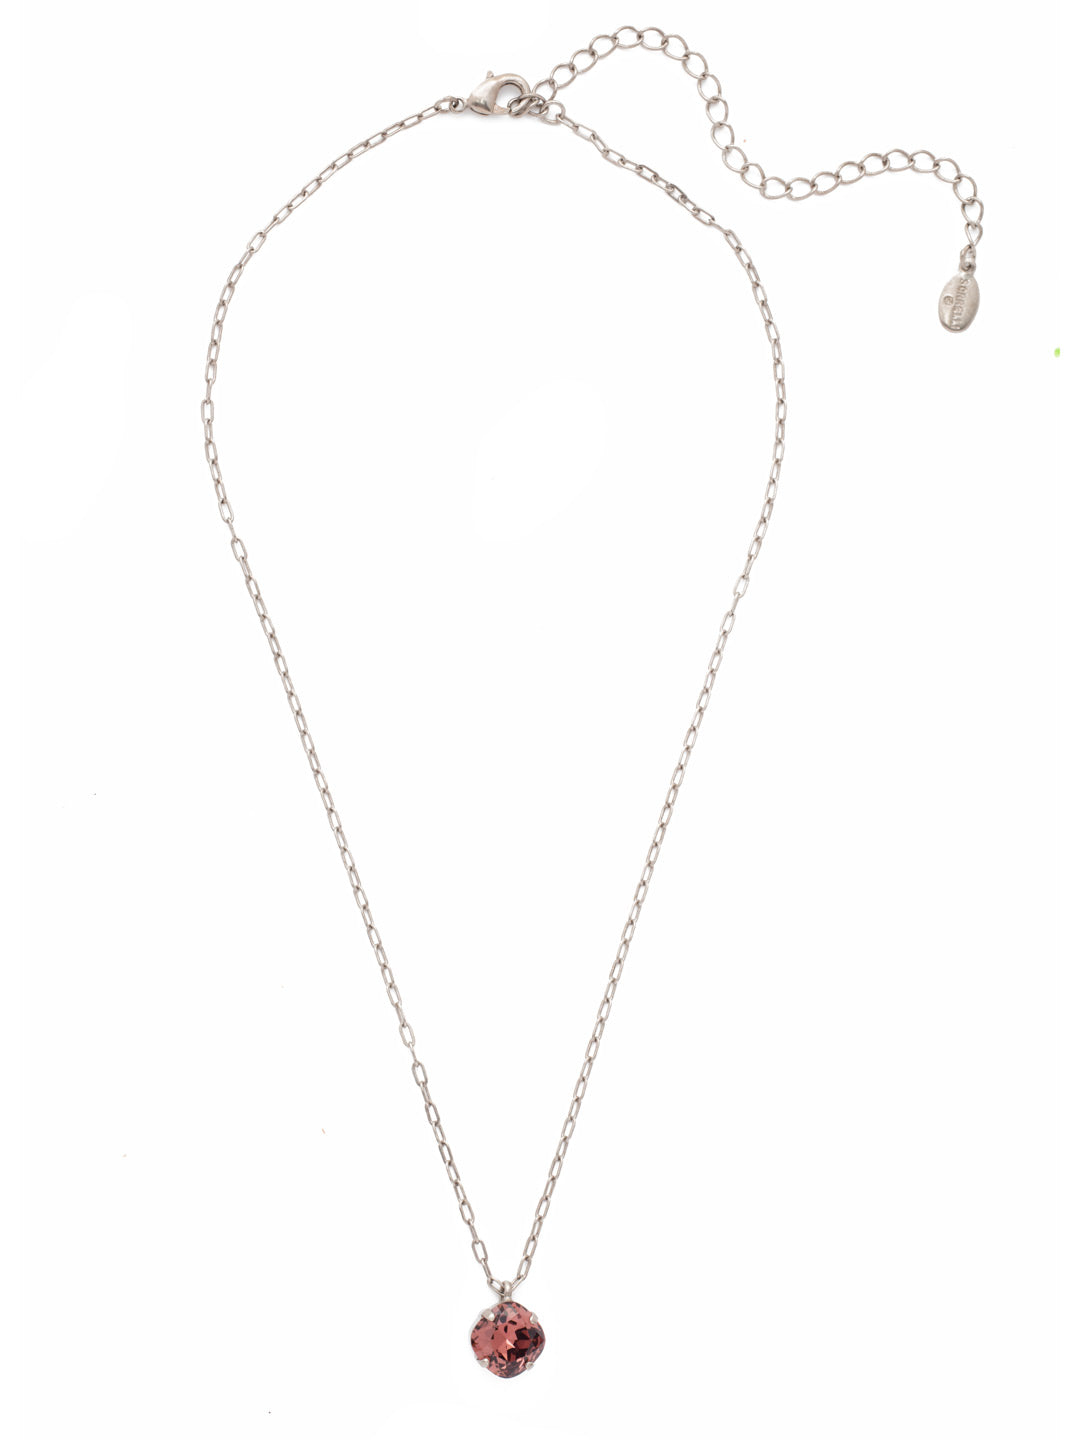 Siren Pendant Necklace - NEP22ASBUR - <p>With a cushion-cut crystal and delicate chain, the Siren Pendant  will add a litle sparkle to your everyday look. From Sorrelli's Burgundy collection in our Antique Silver-tone finish.</p>